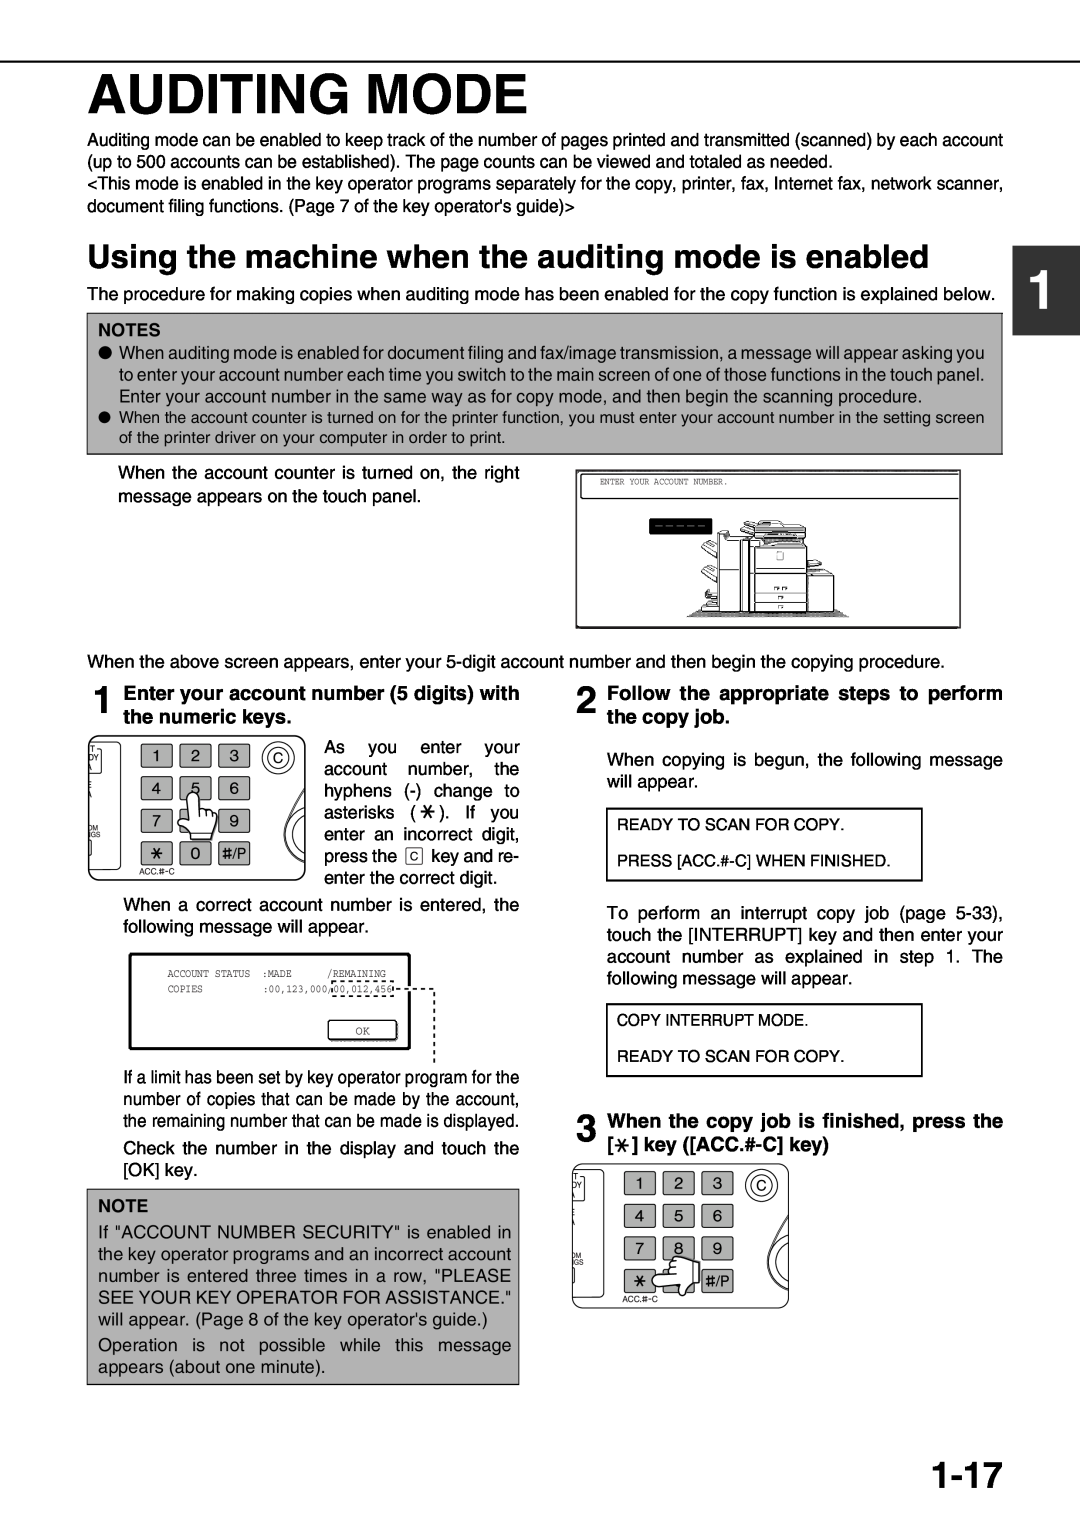 Sharp AR-M700N, AR-M700U, AR-M550N, AR-M620N Auditing Mode, 1-17, Using the machine when the auditing mode is enabled 